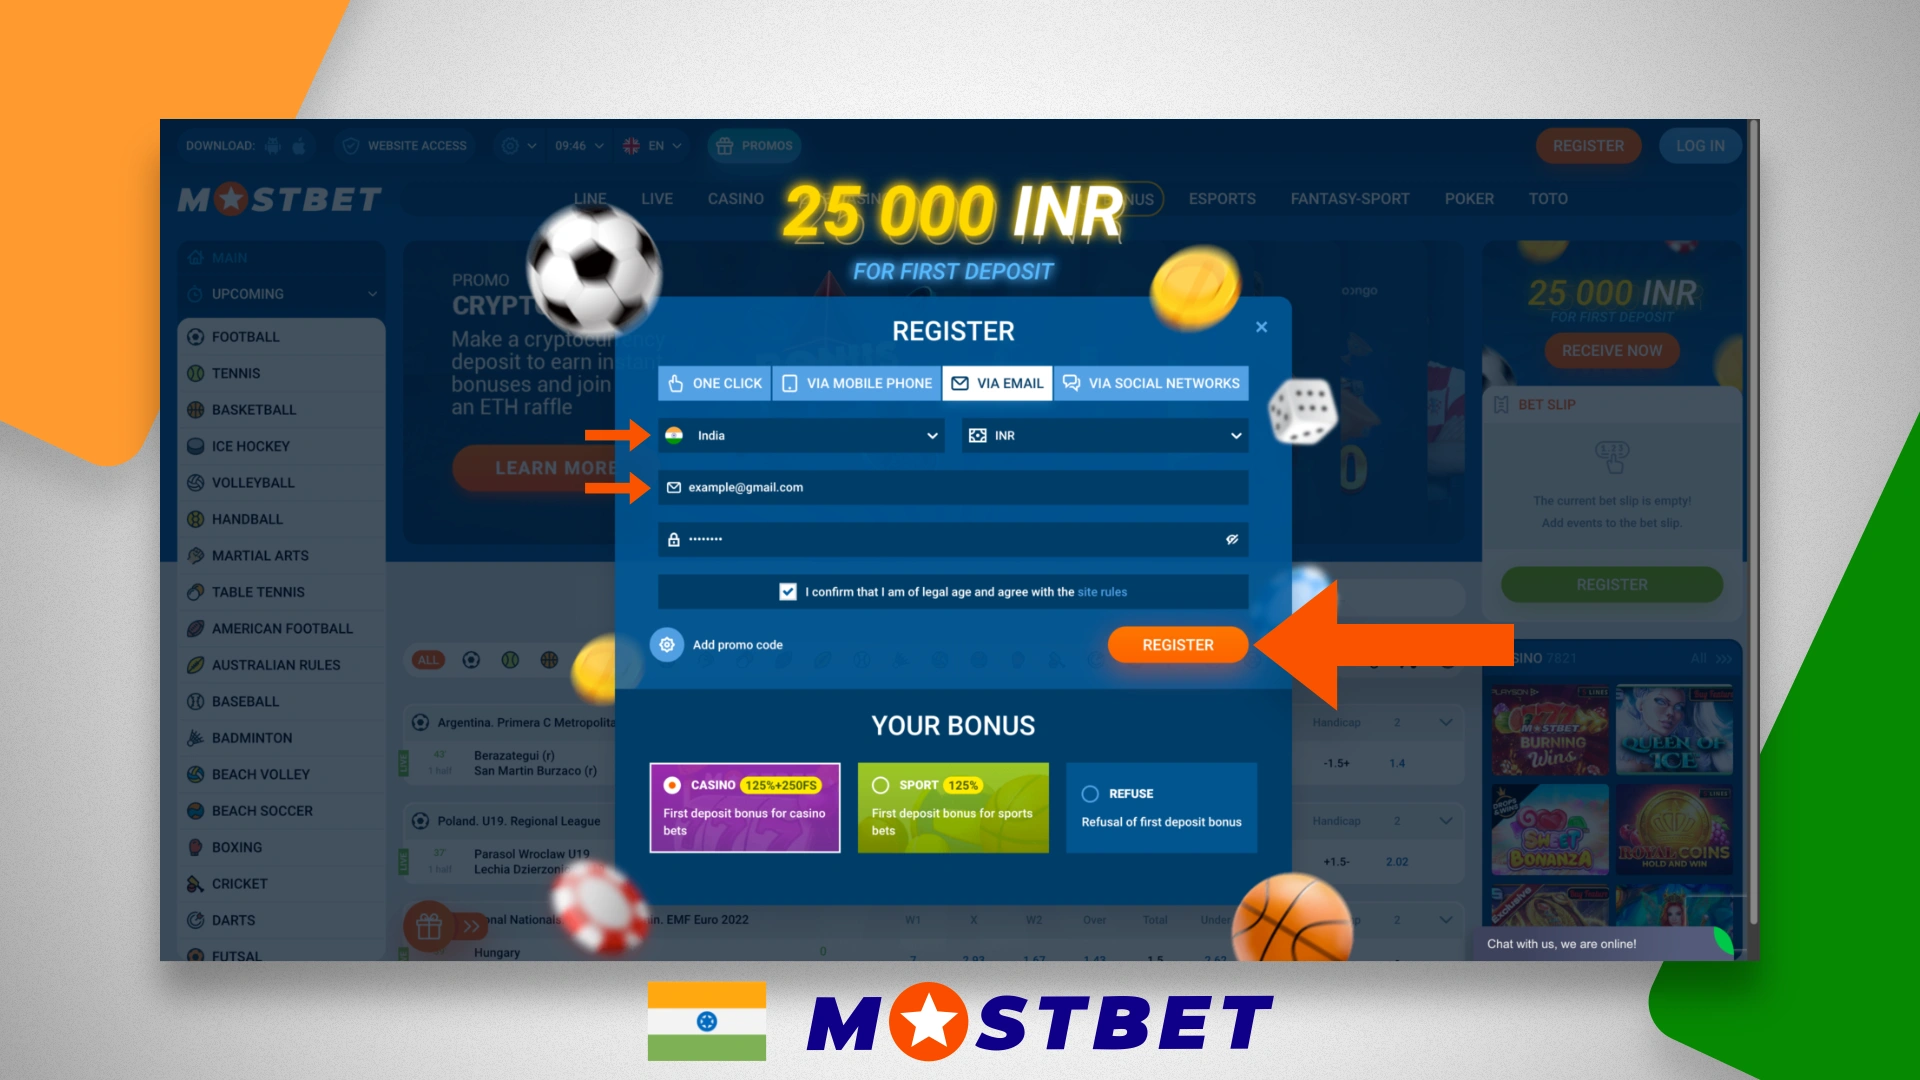 New user registration form on the Mostbet India website